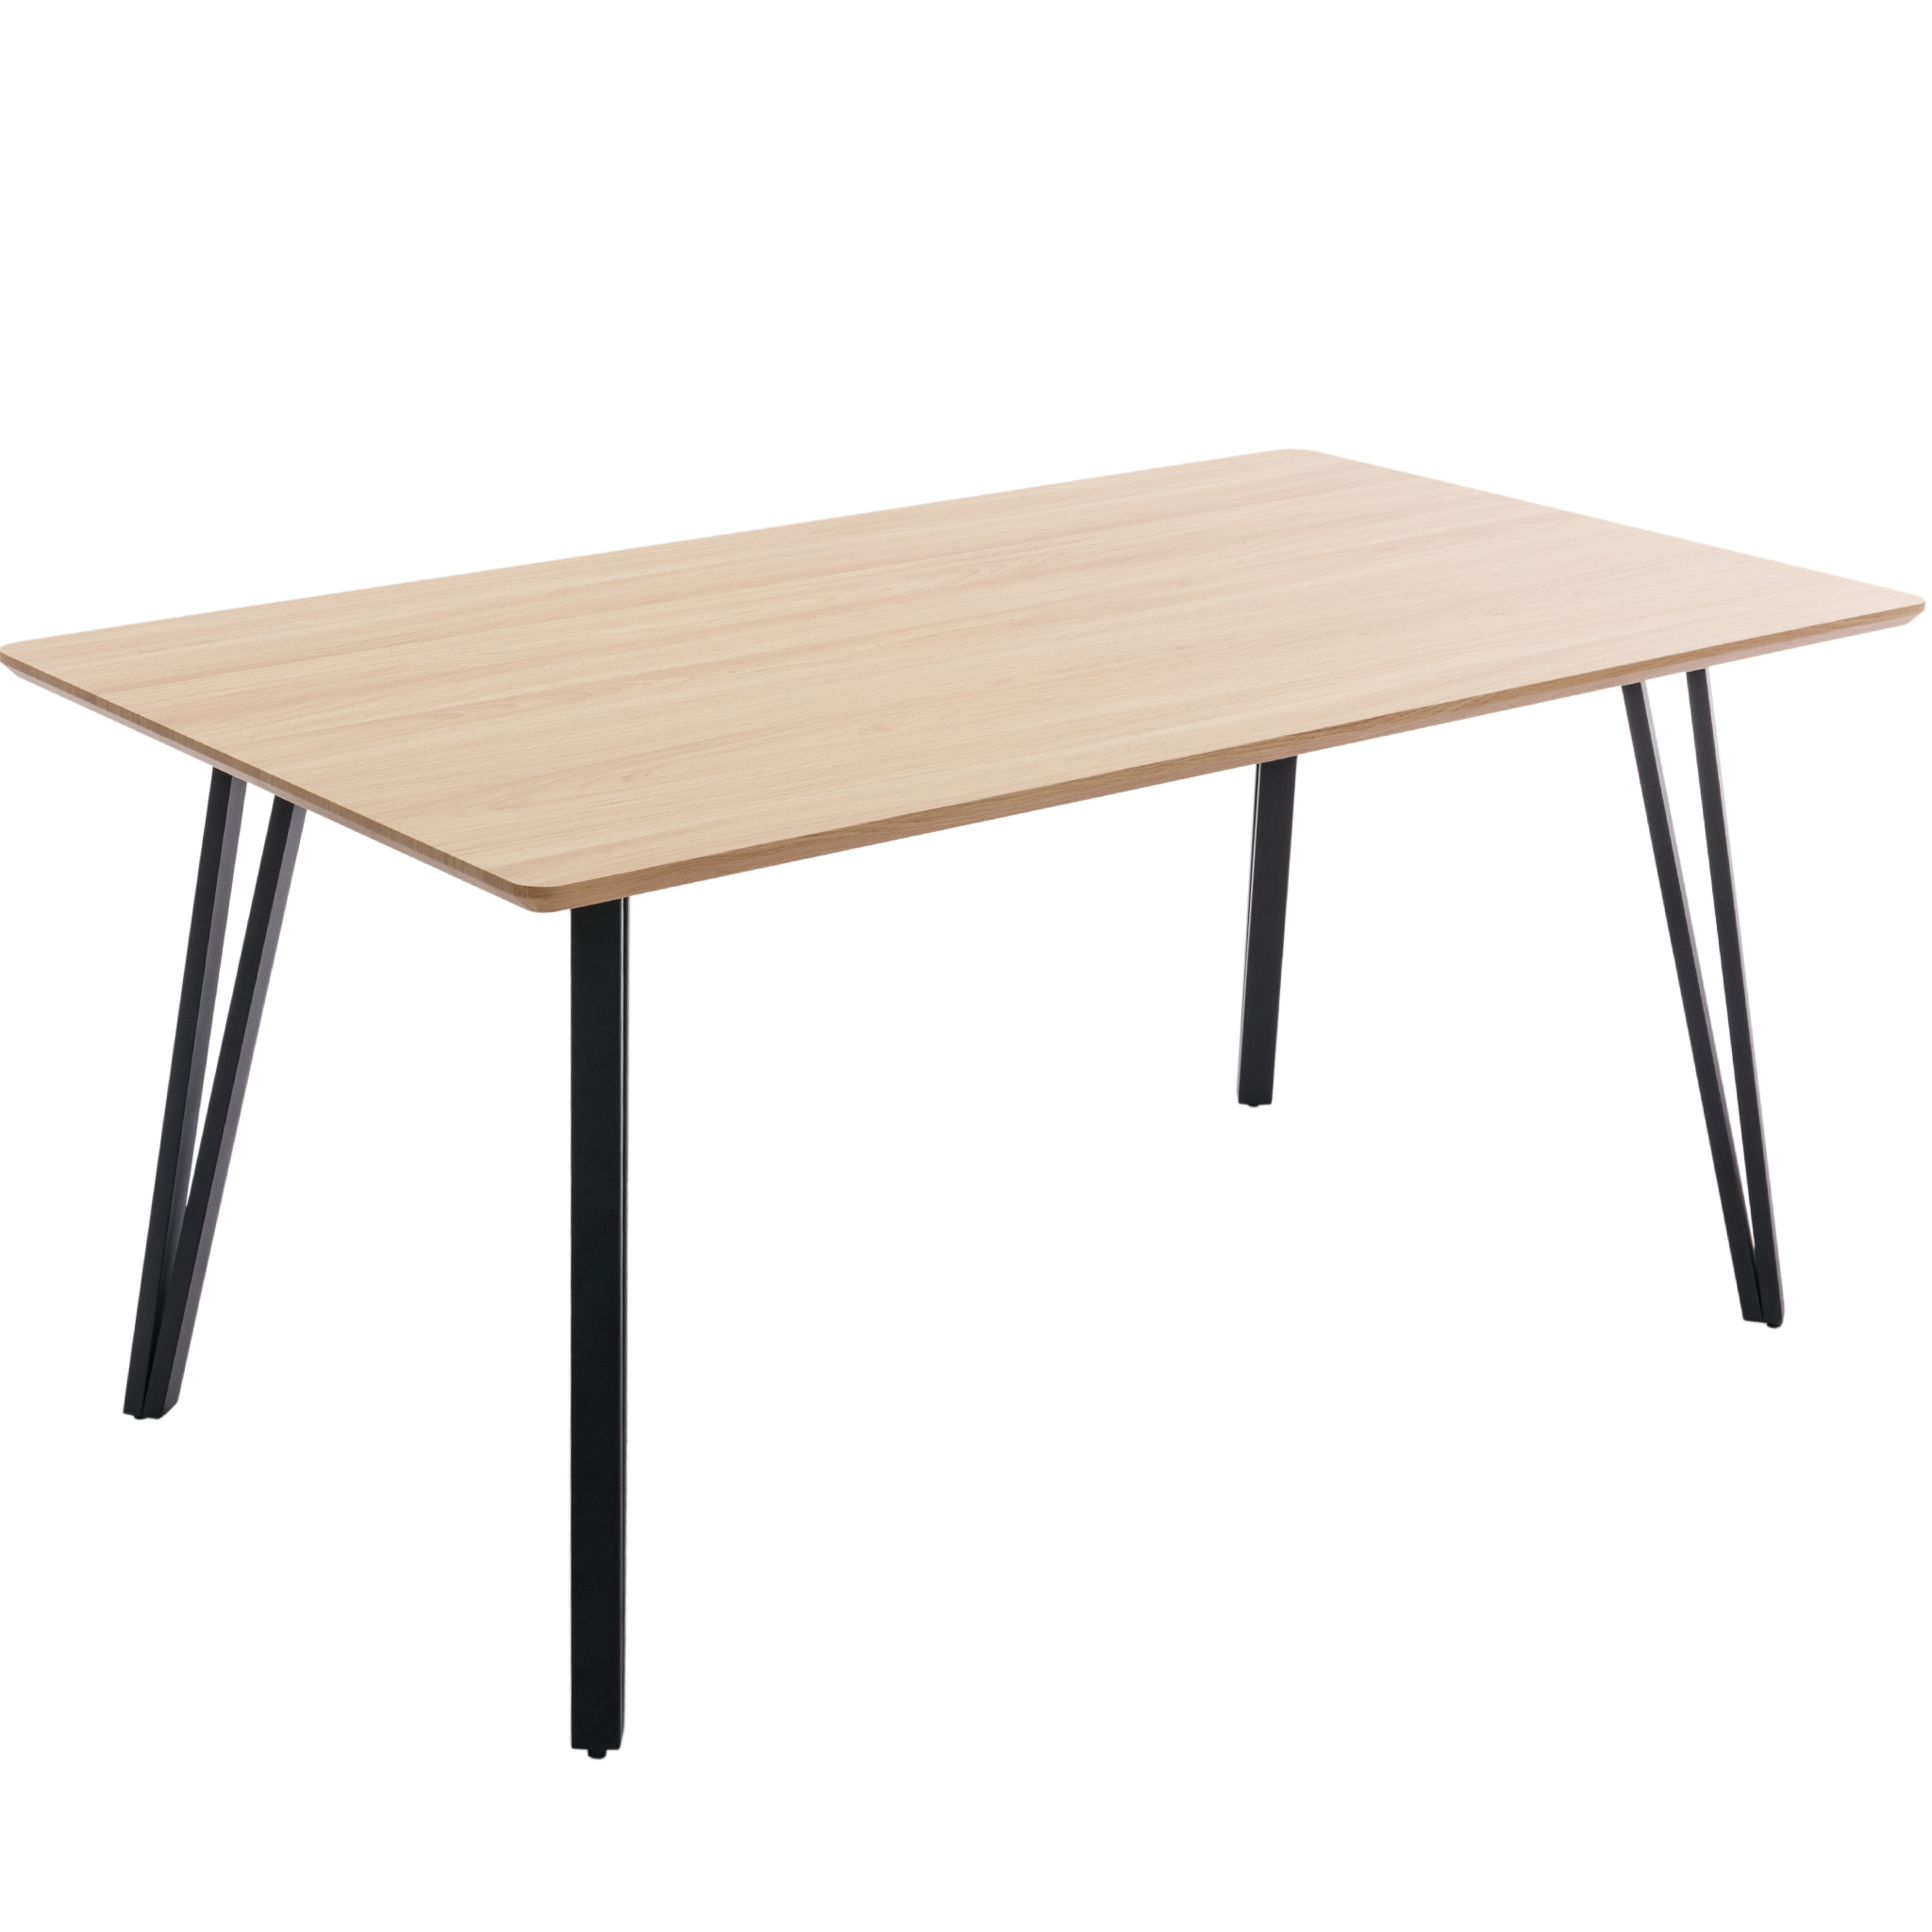 Keira Dining Table 63"